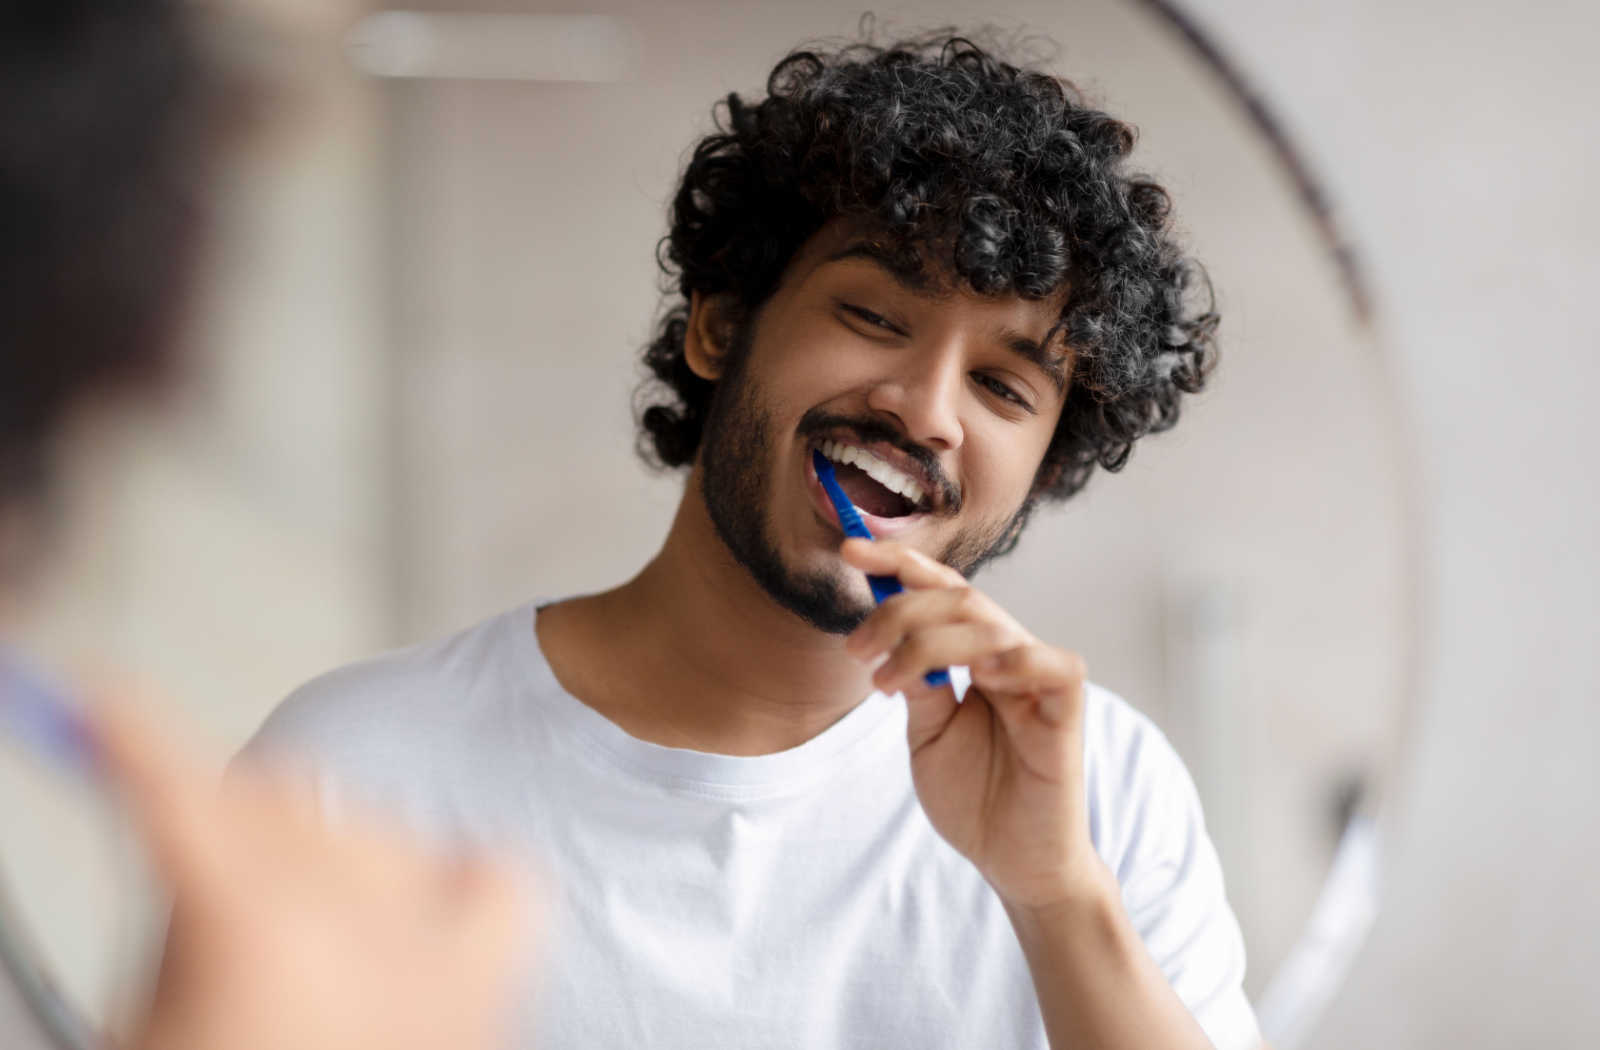 A man with curly hair in a white shirt brushing his teeth in front of a mirror.